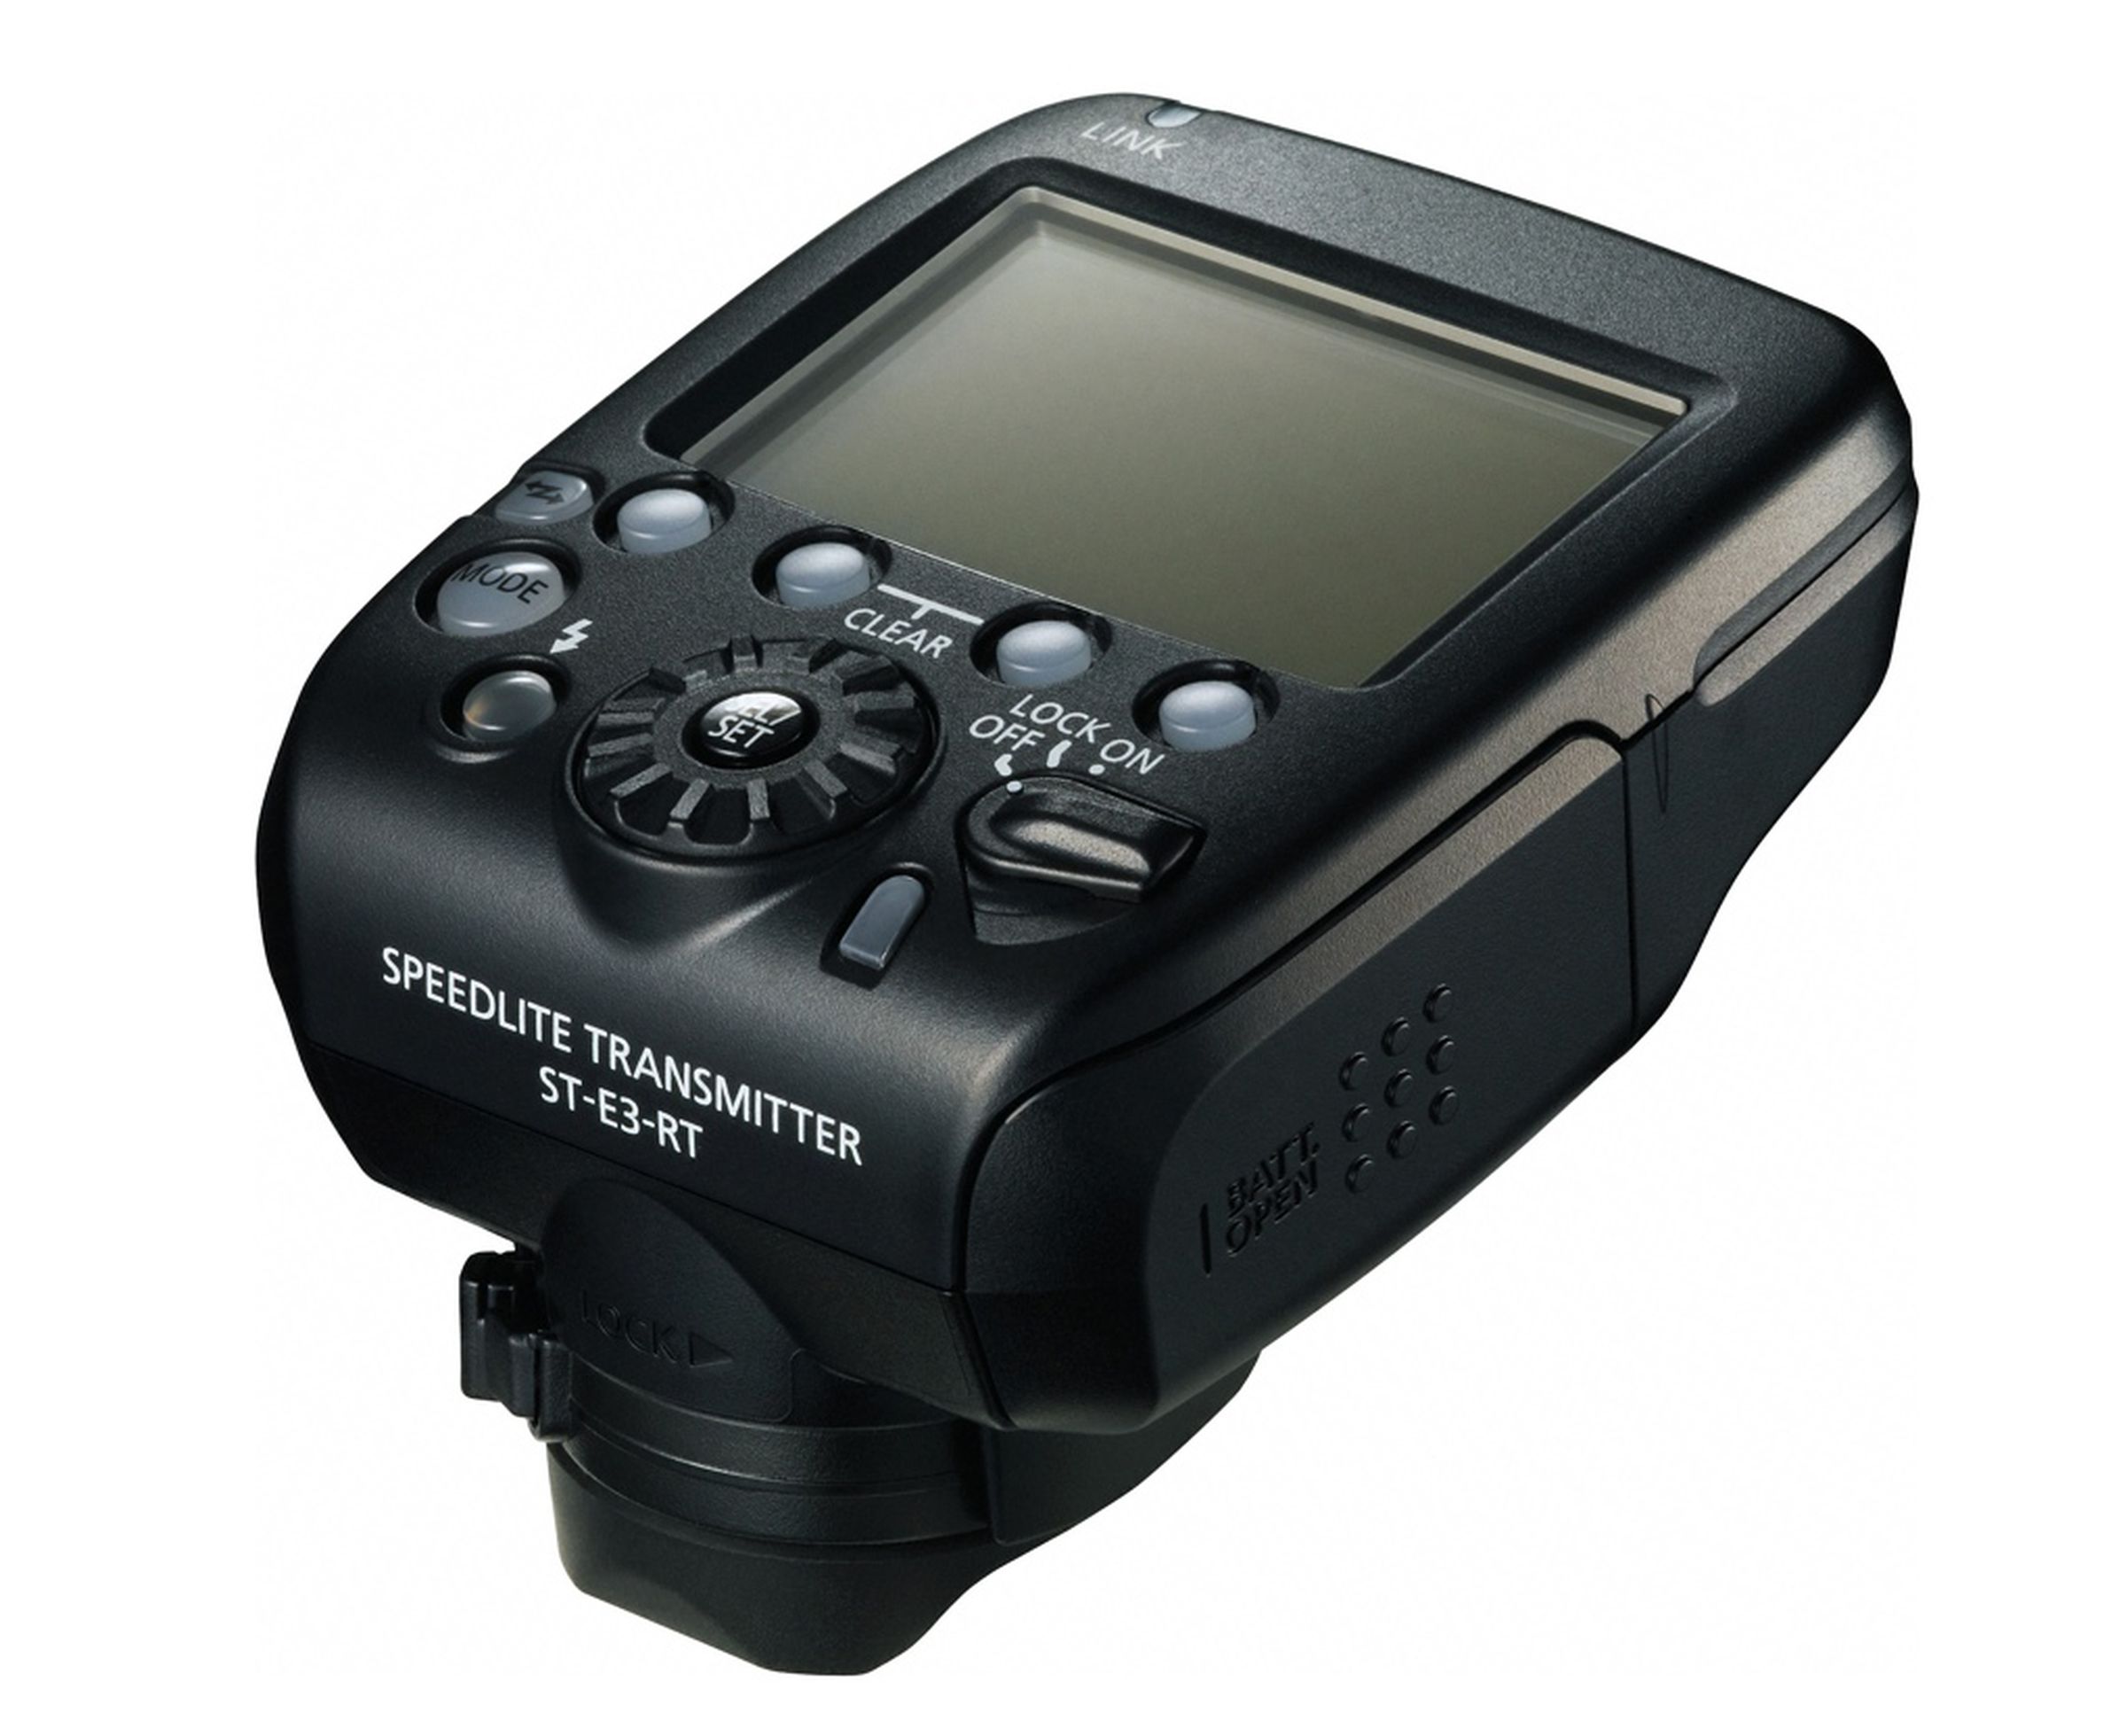 Canon's new accessories: Speedlite 600EX-RT, Battery Grip BG-E11, and others